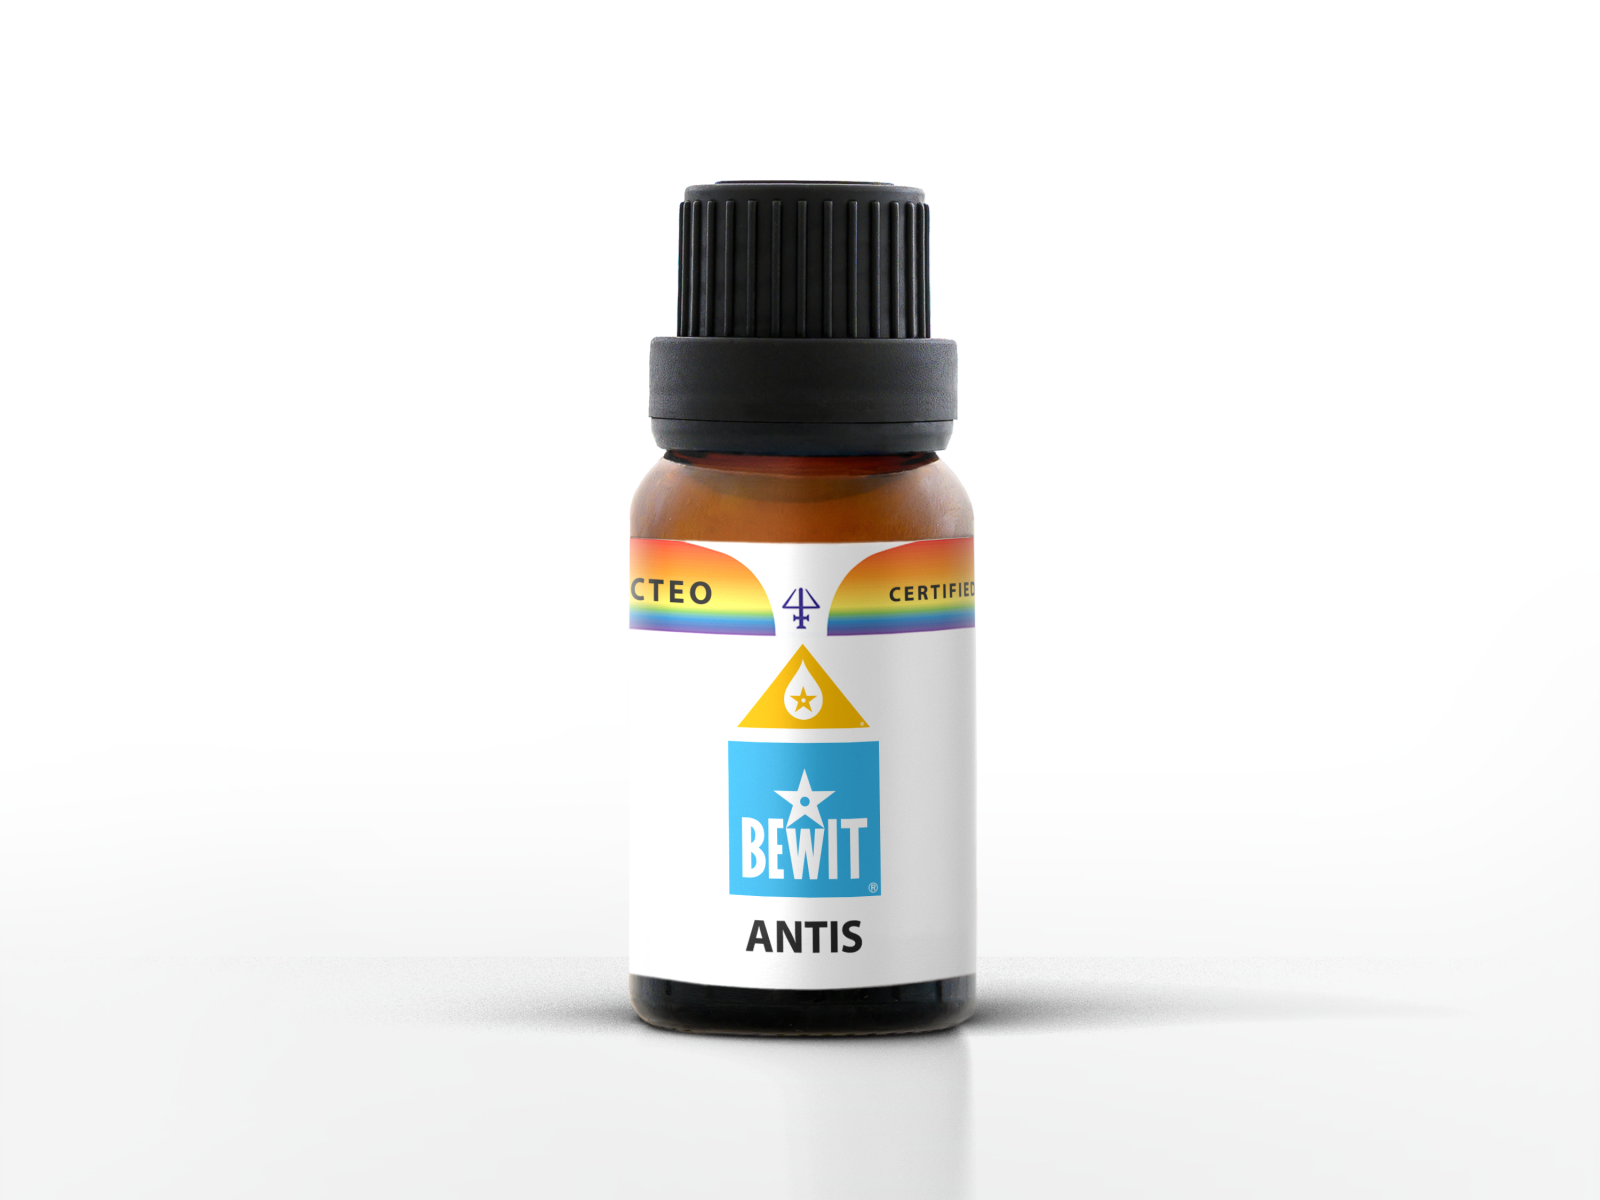 BEWIT ANTIS - This is a blend of the essential oils